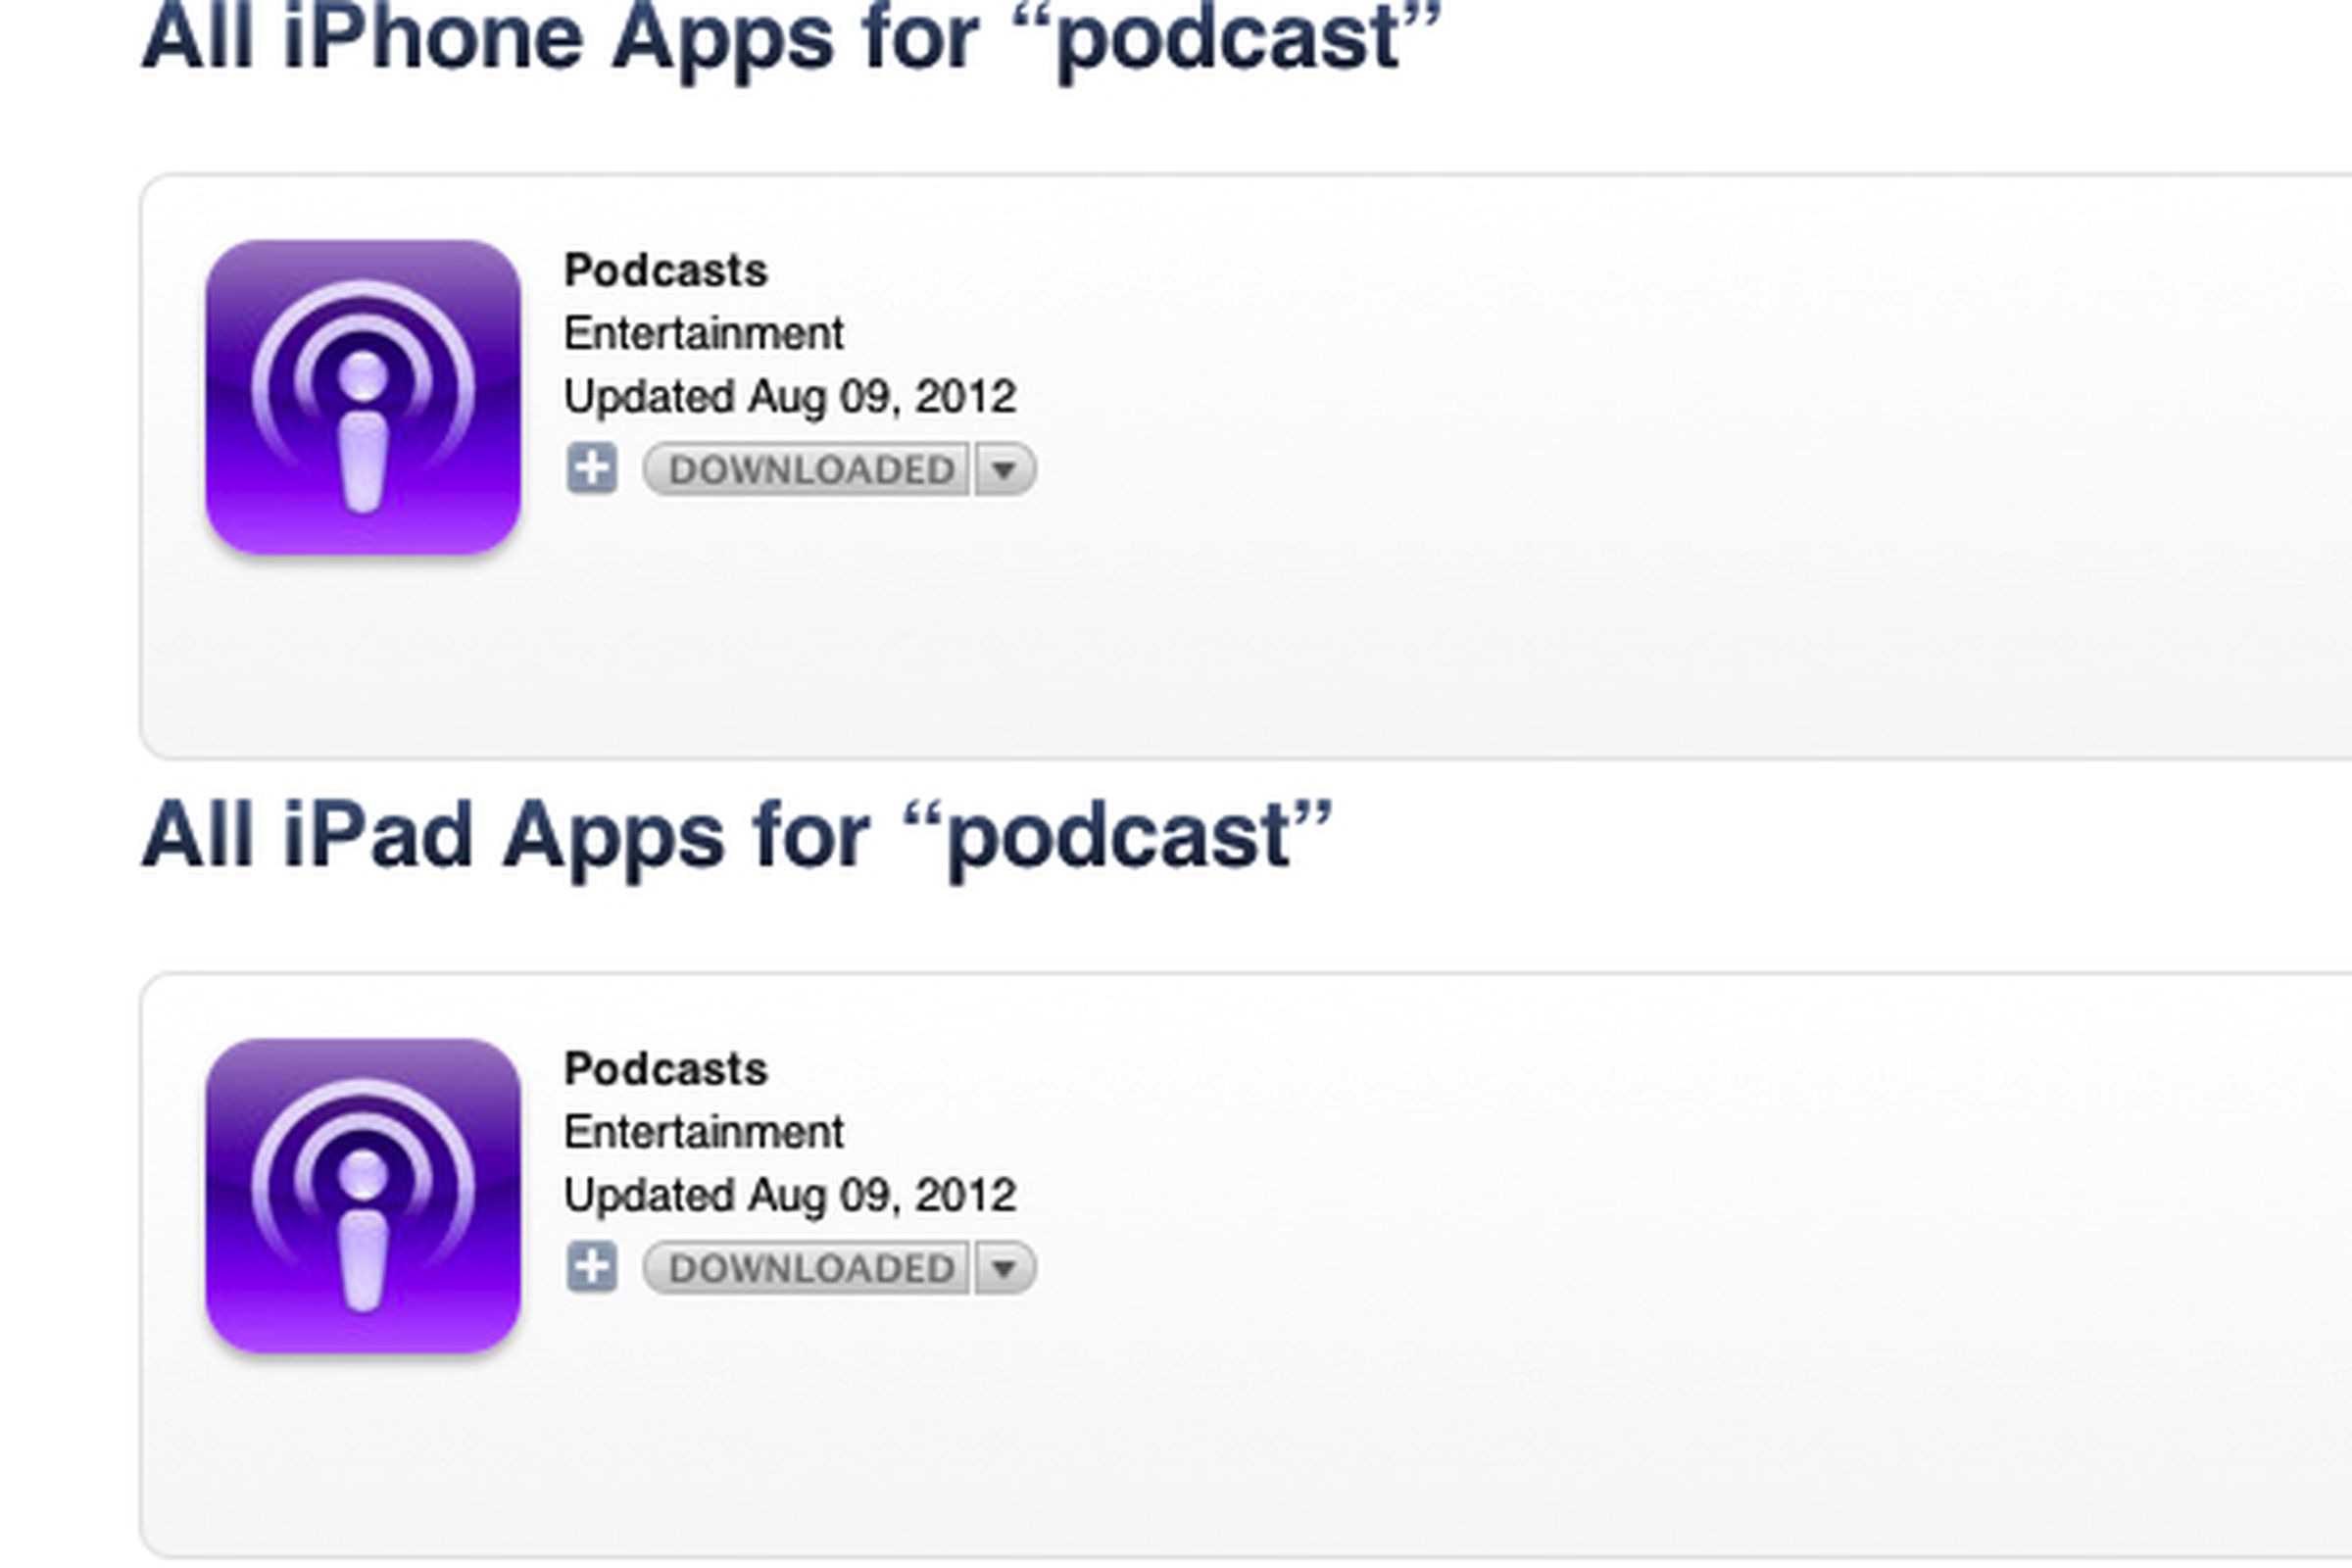 iTunes Podcast results